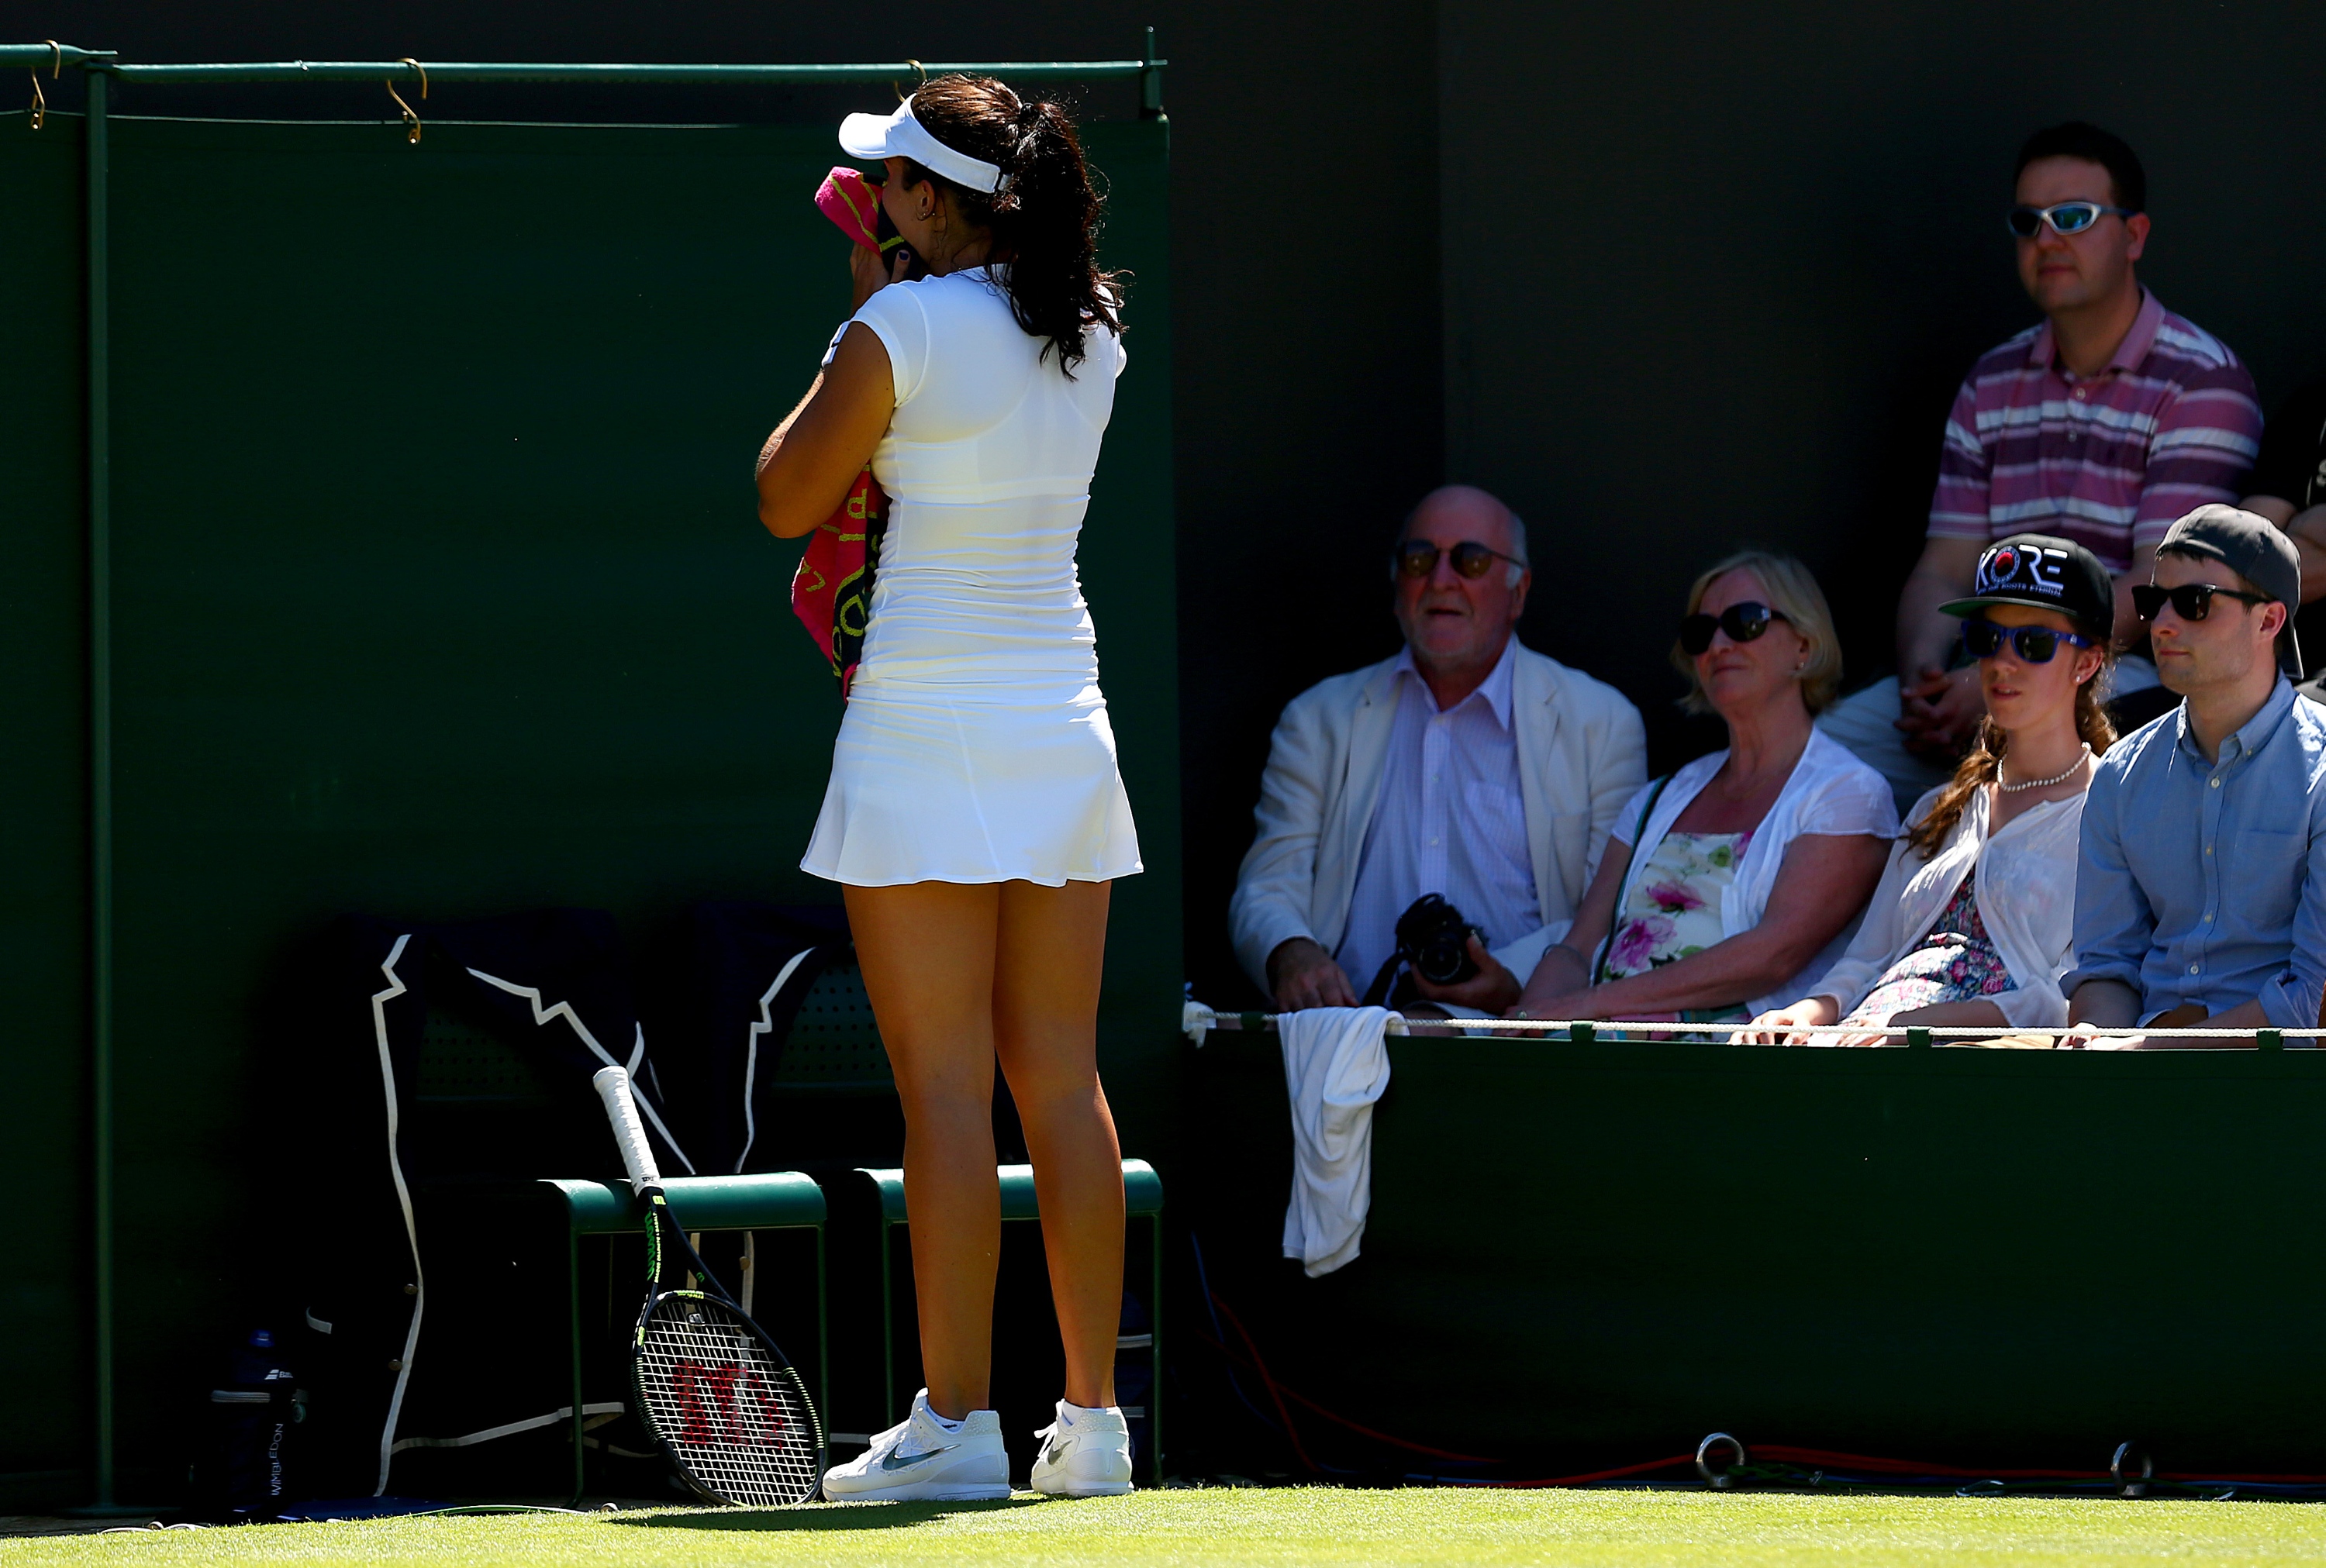 Laura Robson reacts to the heat in her first round match against Evgeniya Rodina of Russia. (Getty)